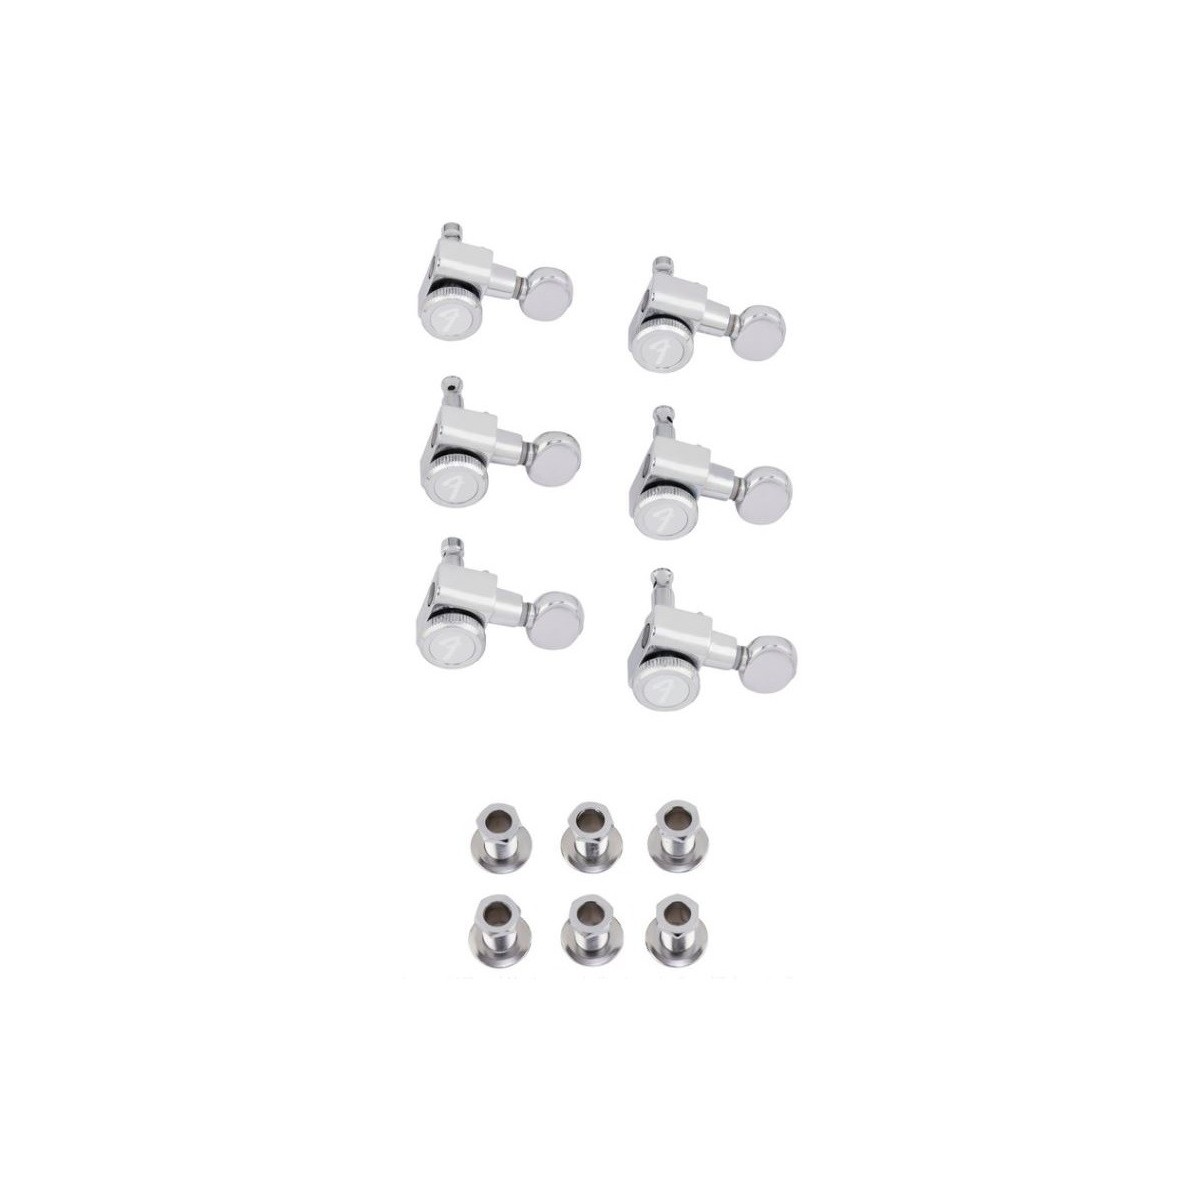 FENDER 099-0818-500 LOCKING TUNERS CHROME VINTAGE BUTTONS